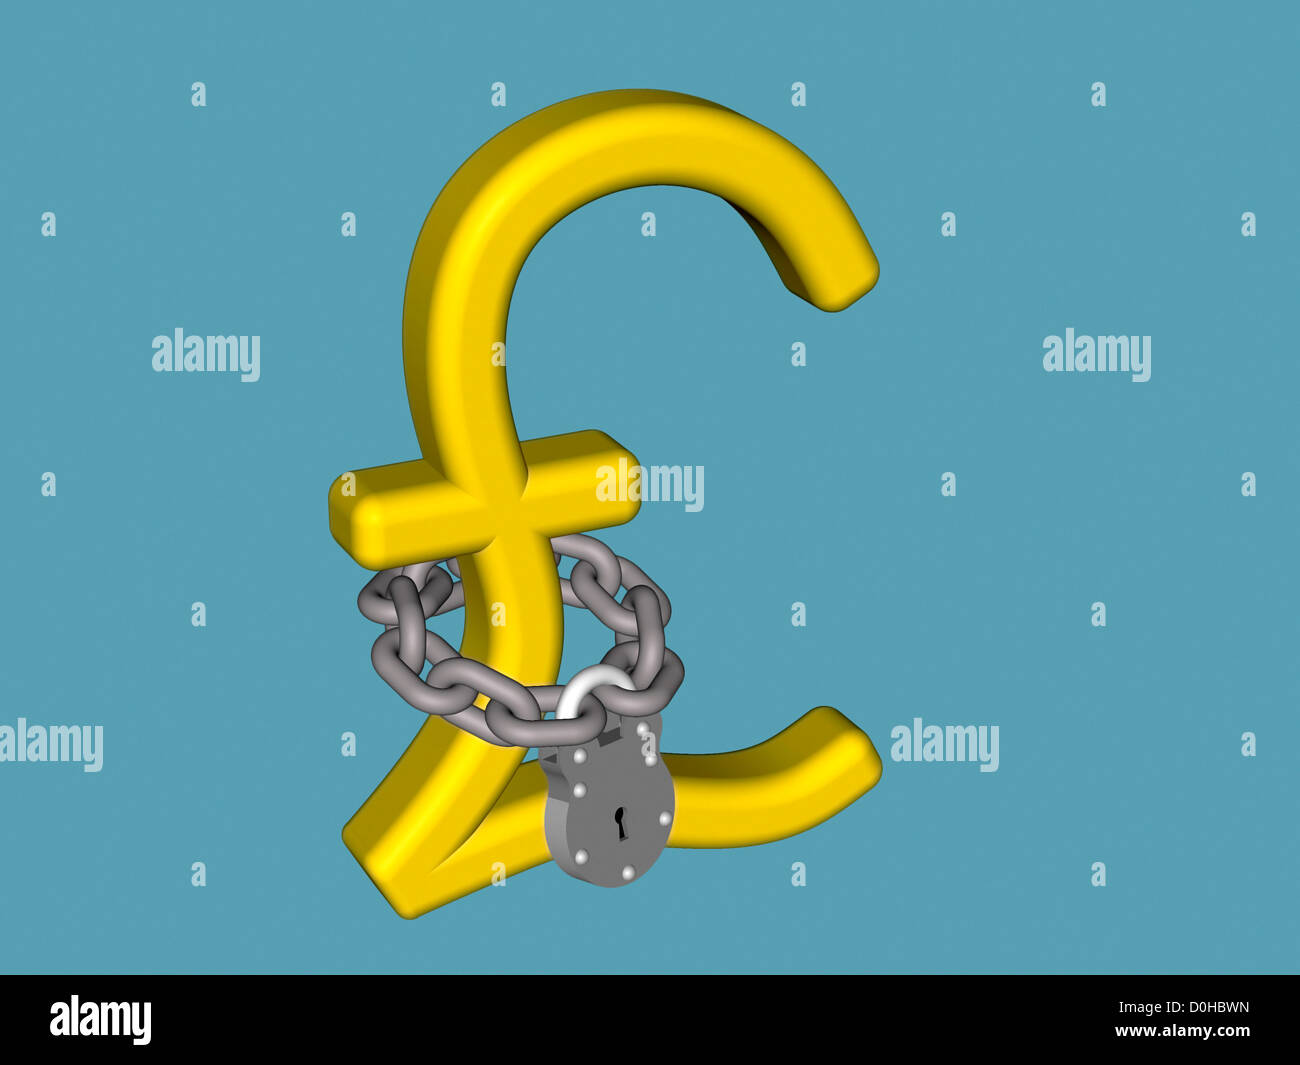 Illustration of a Pound Symbol Chained and Padlocked Stock Photo